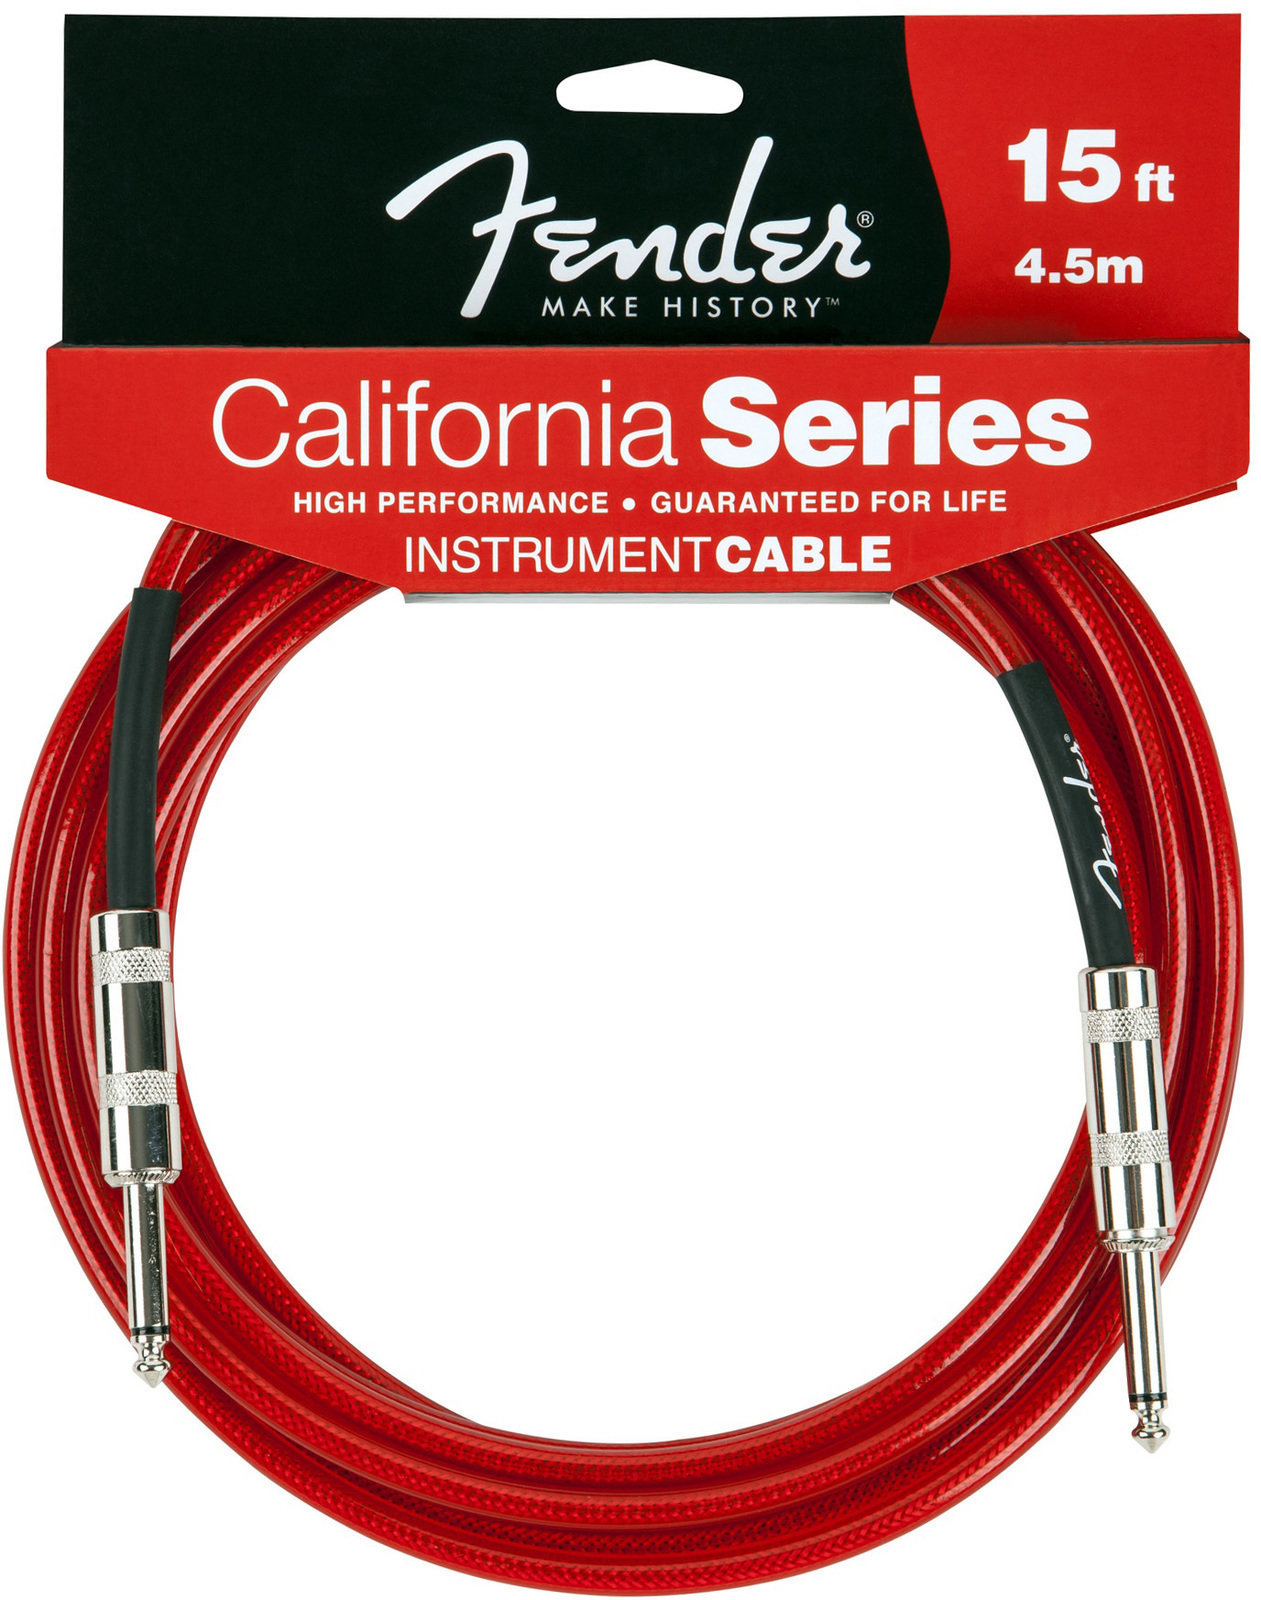 Cabo do instrumento Fender California Instrument Cable 4,5m - Candy Apple Red